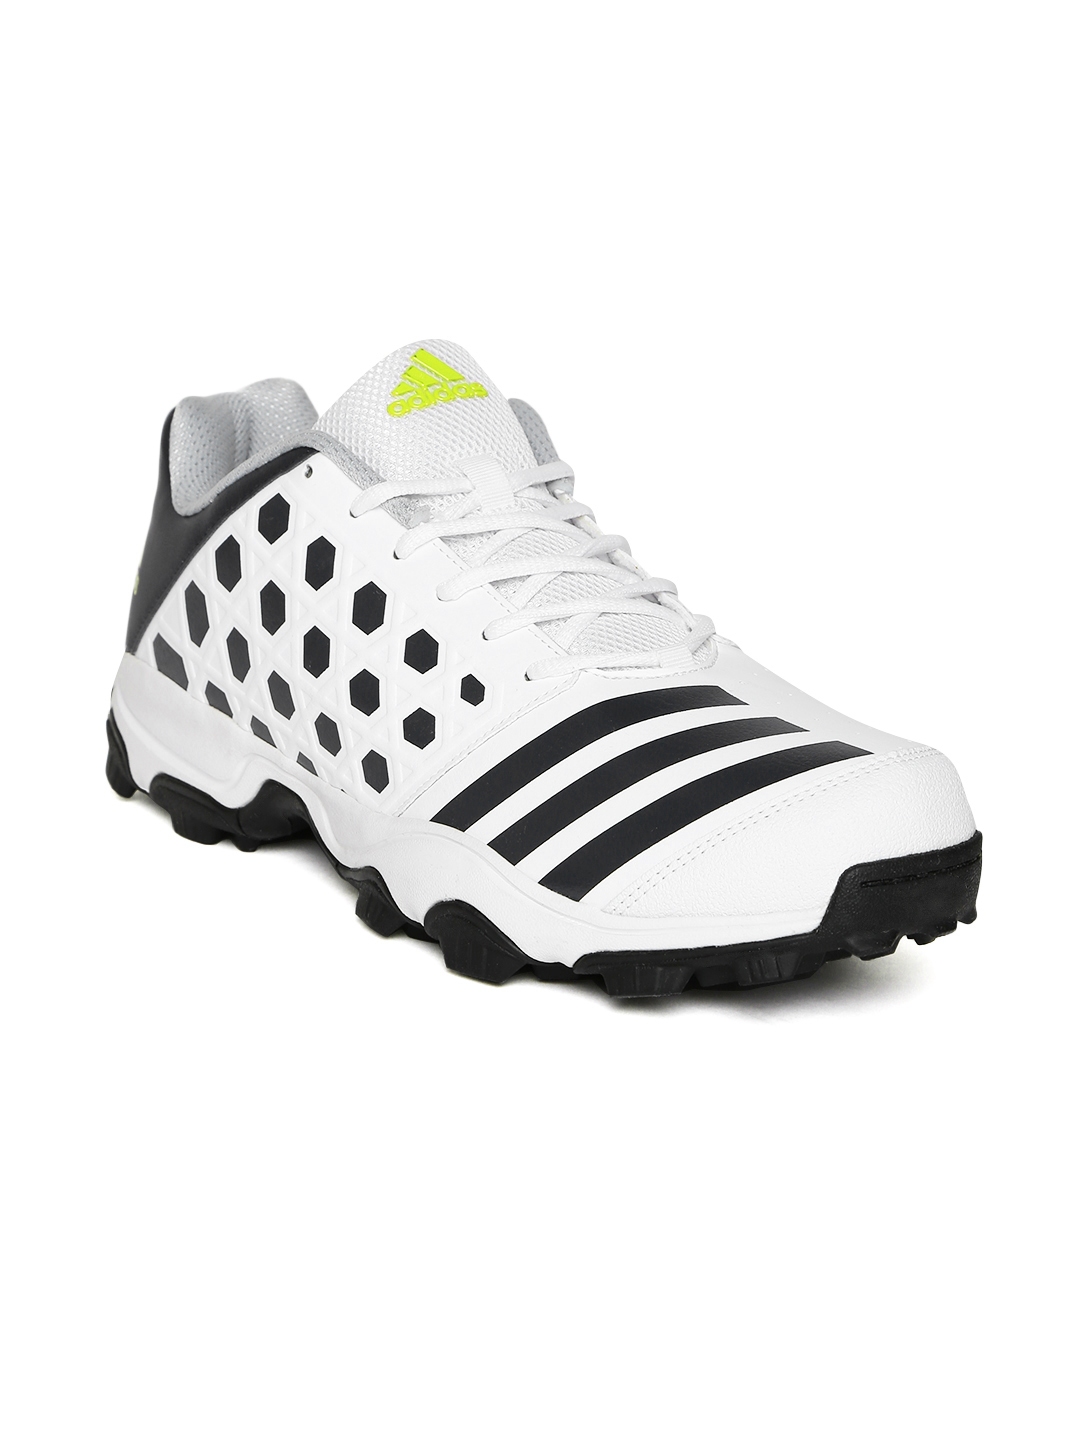 Buy ADIDAS Men White SL 22 Trainer Printed Cricket Shoes Sports Shoes